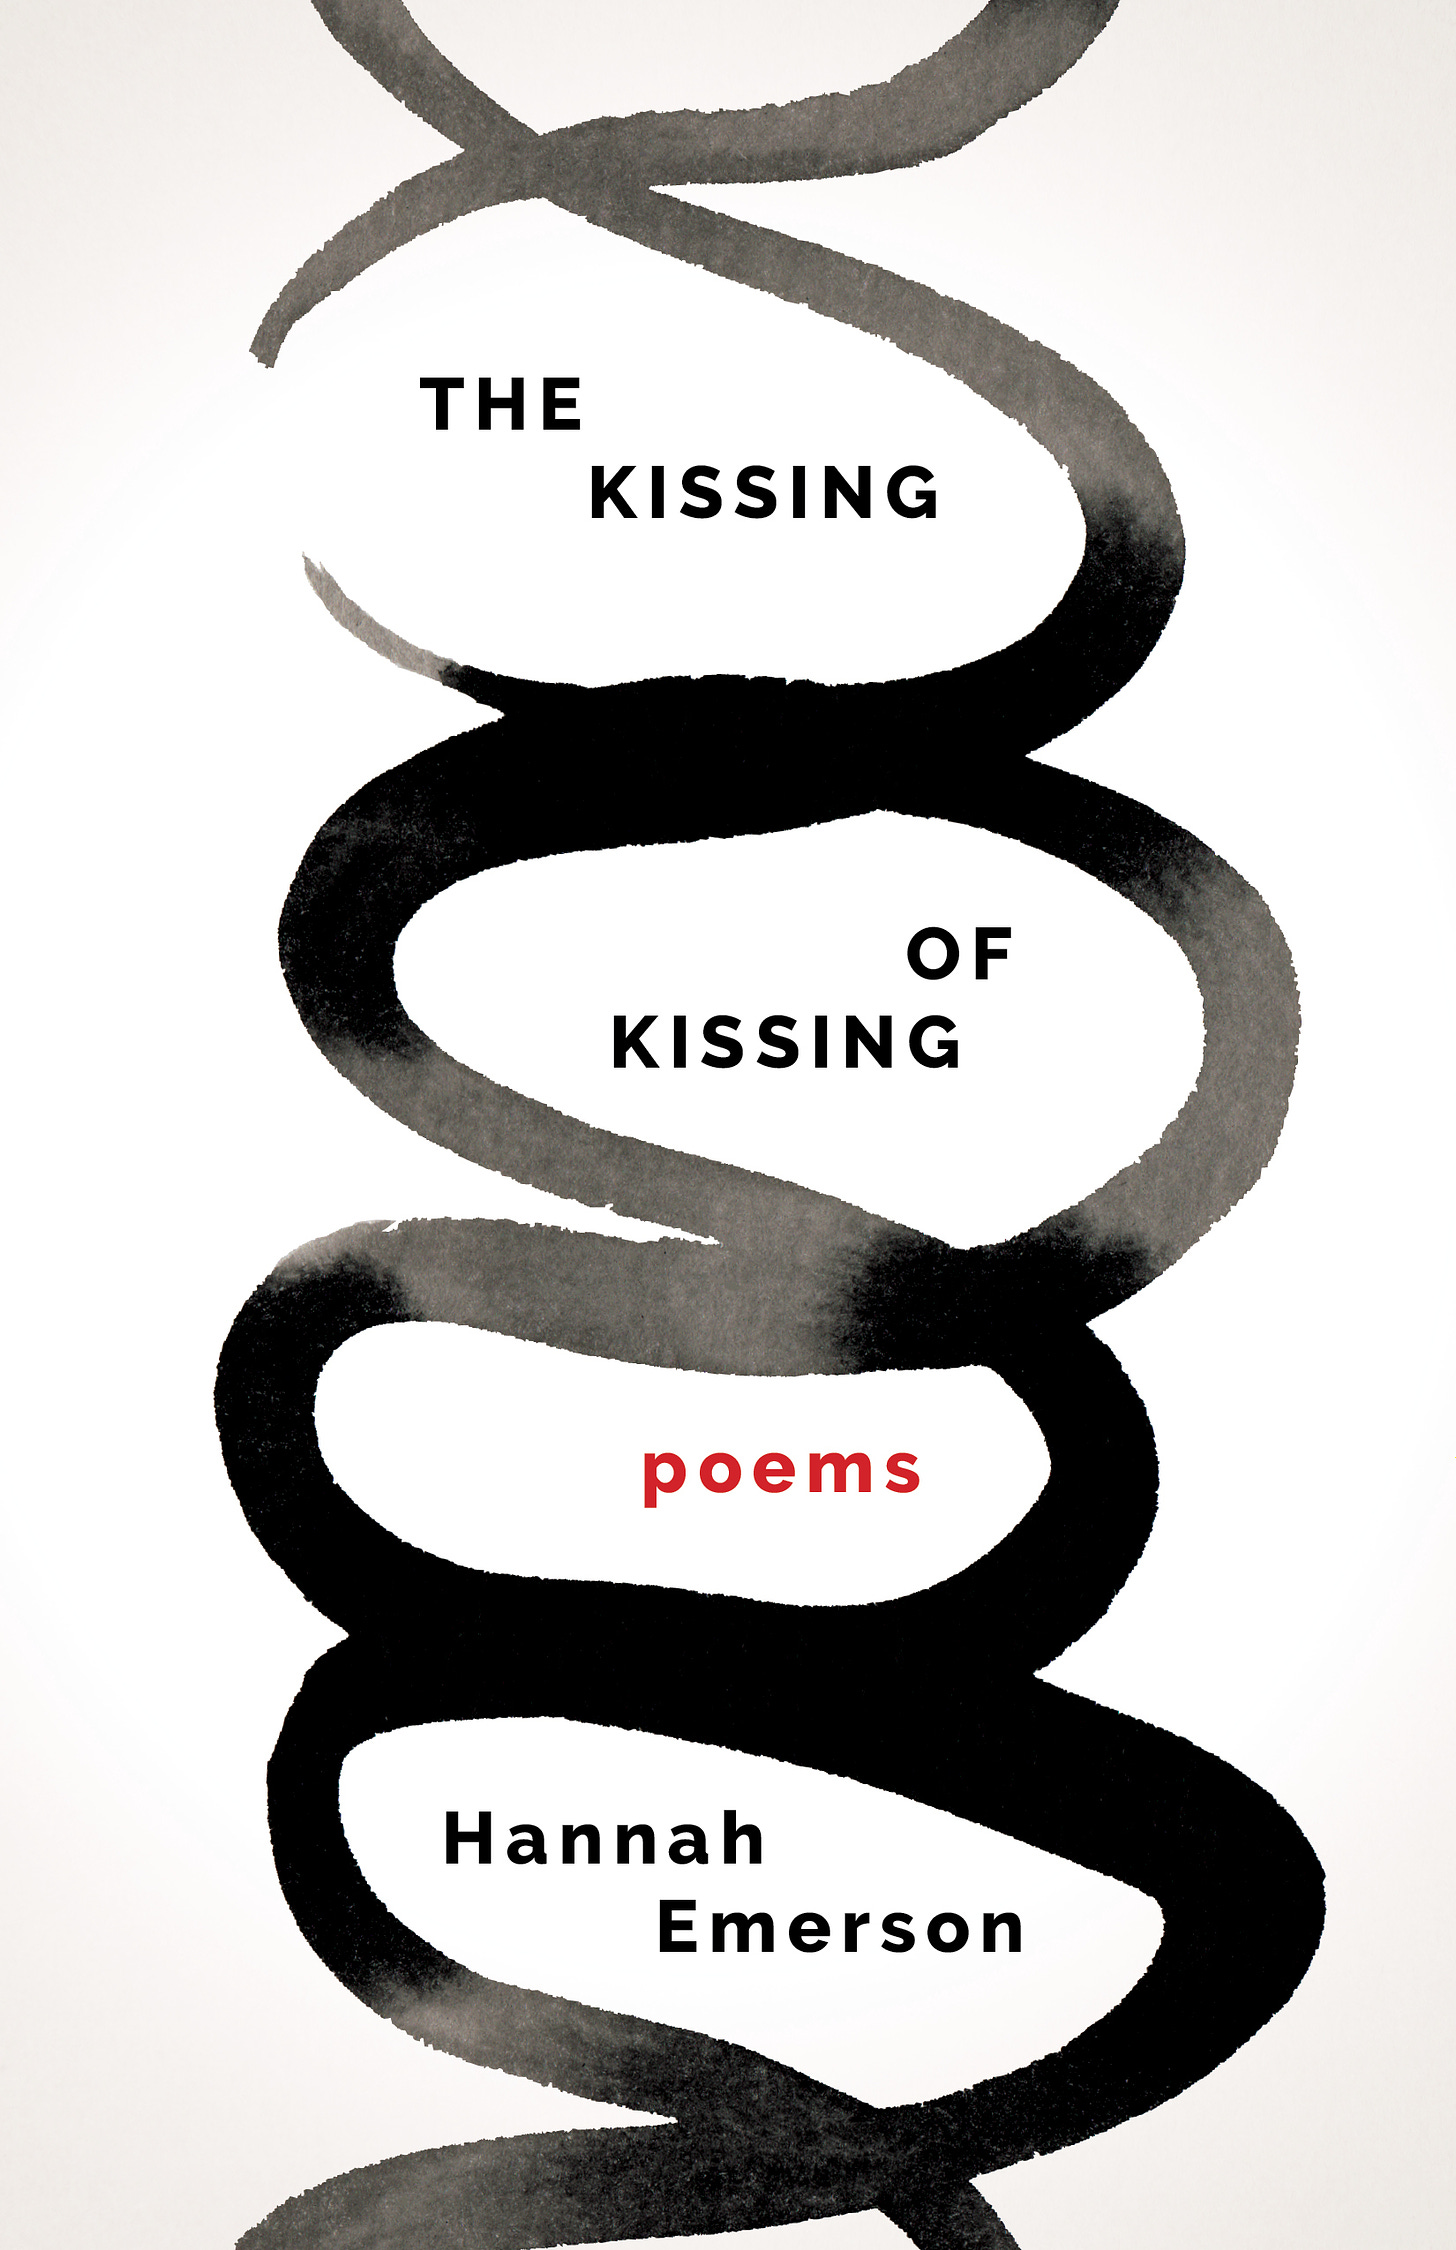 The cover of Hannah Emerson's poetry collection The Kissing of Kissing shows two black watercolor lines intertwining in a spiral down the page, against a white background. The text reads: The Kissing of Kissing (in black type), poems (in red type), Hannah Emerson (in black type). Book cover design: Mary Austin Speaker